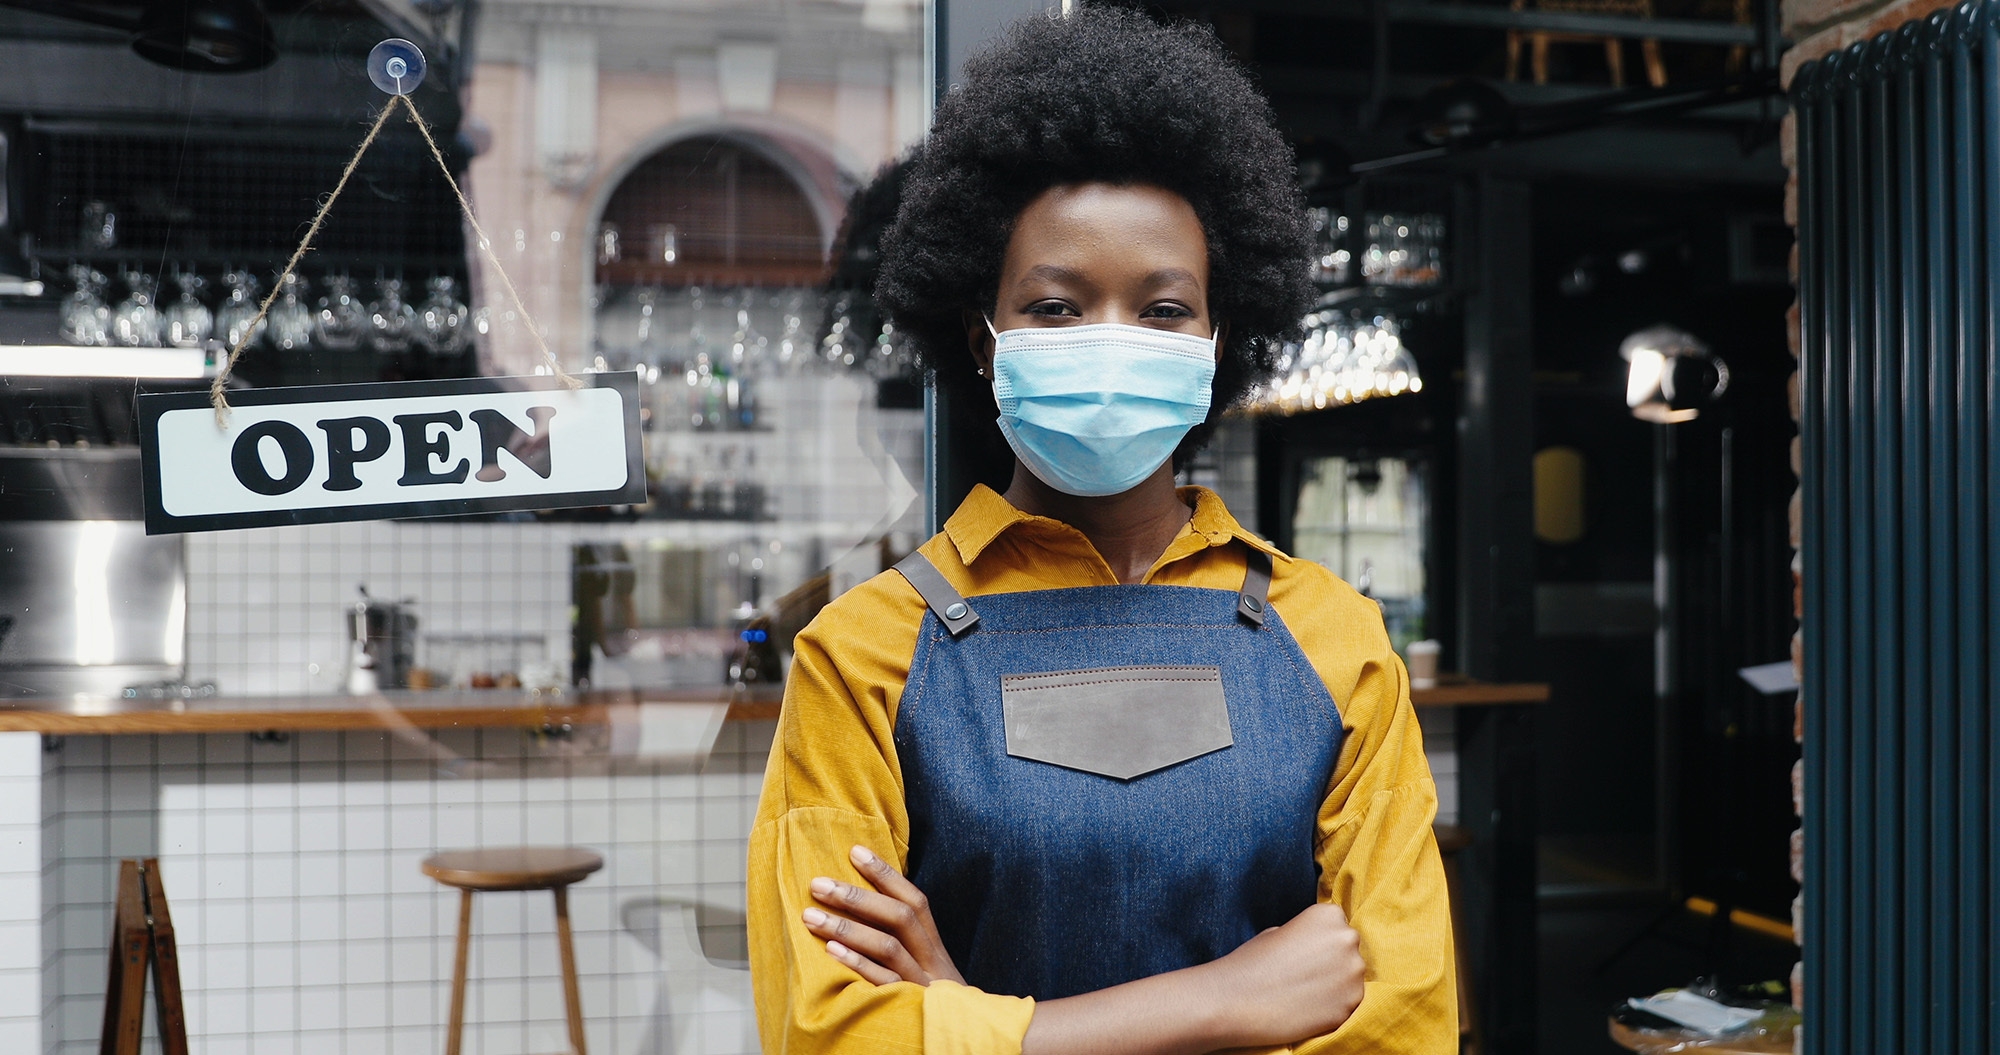 A Black woman wearing a mask and a denim apron stands in the open doorway of a restaurant